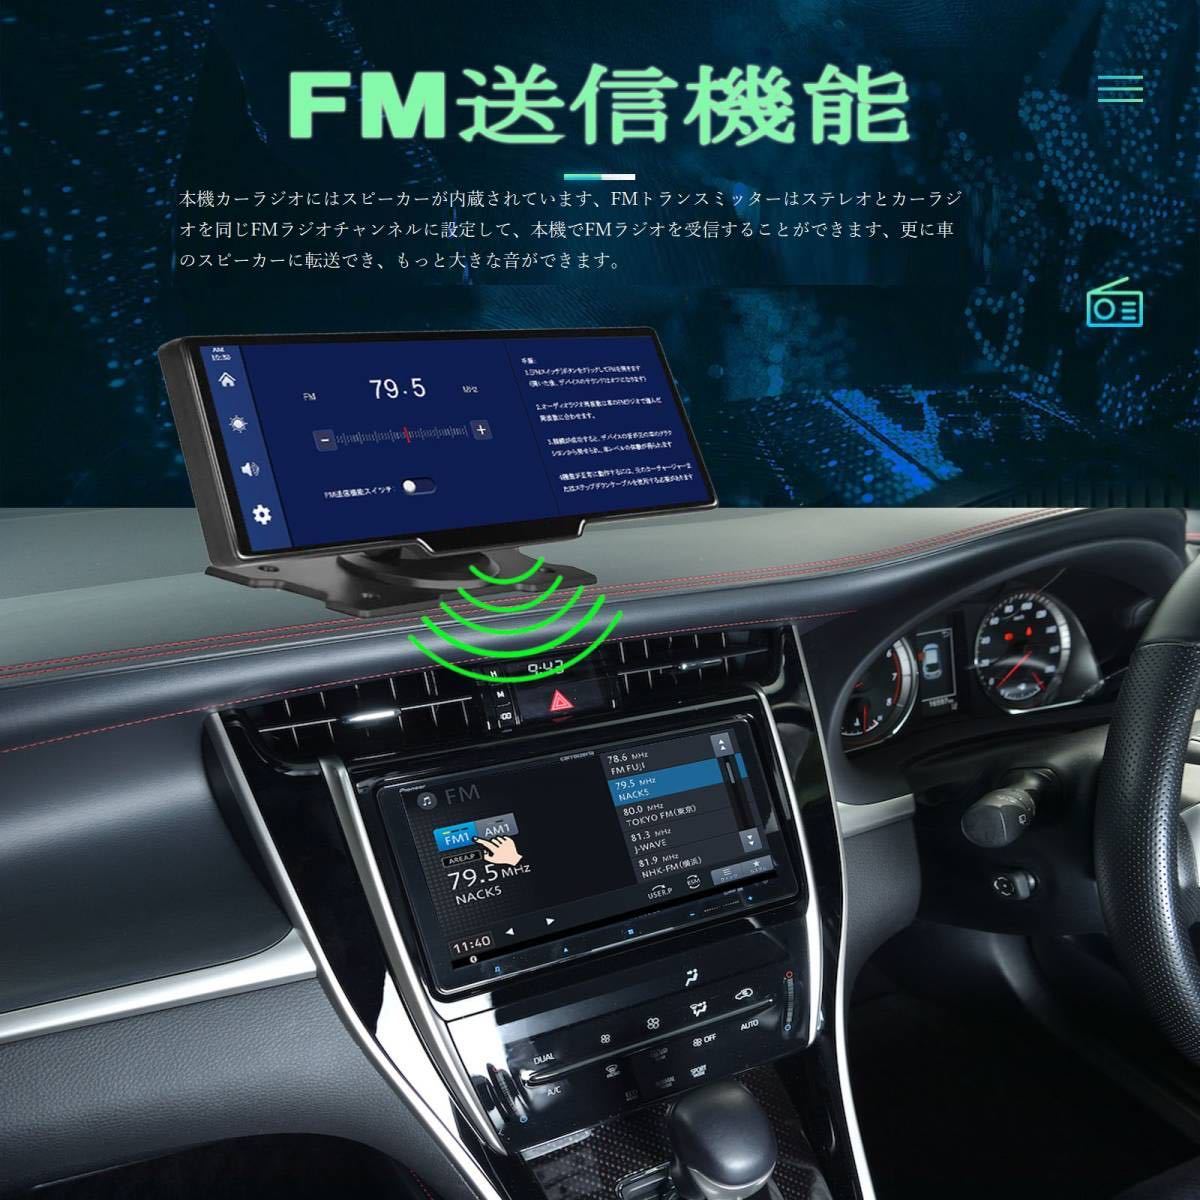 2023 newest large screen in-vehicle monitor CarPlay /Android Auto correspondence 10.26 -inch portable display audio on dash monitor 